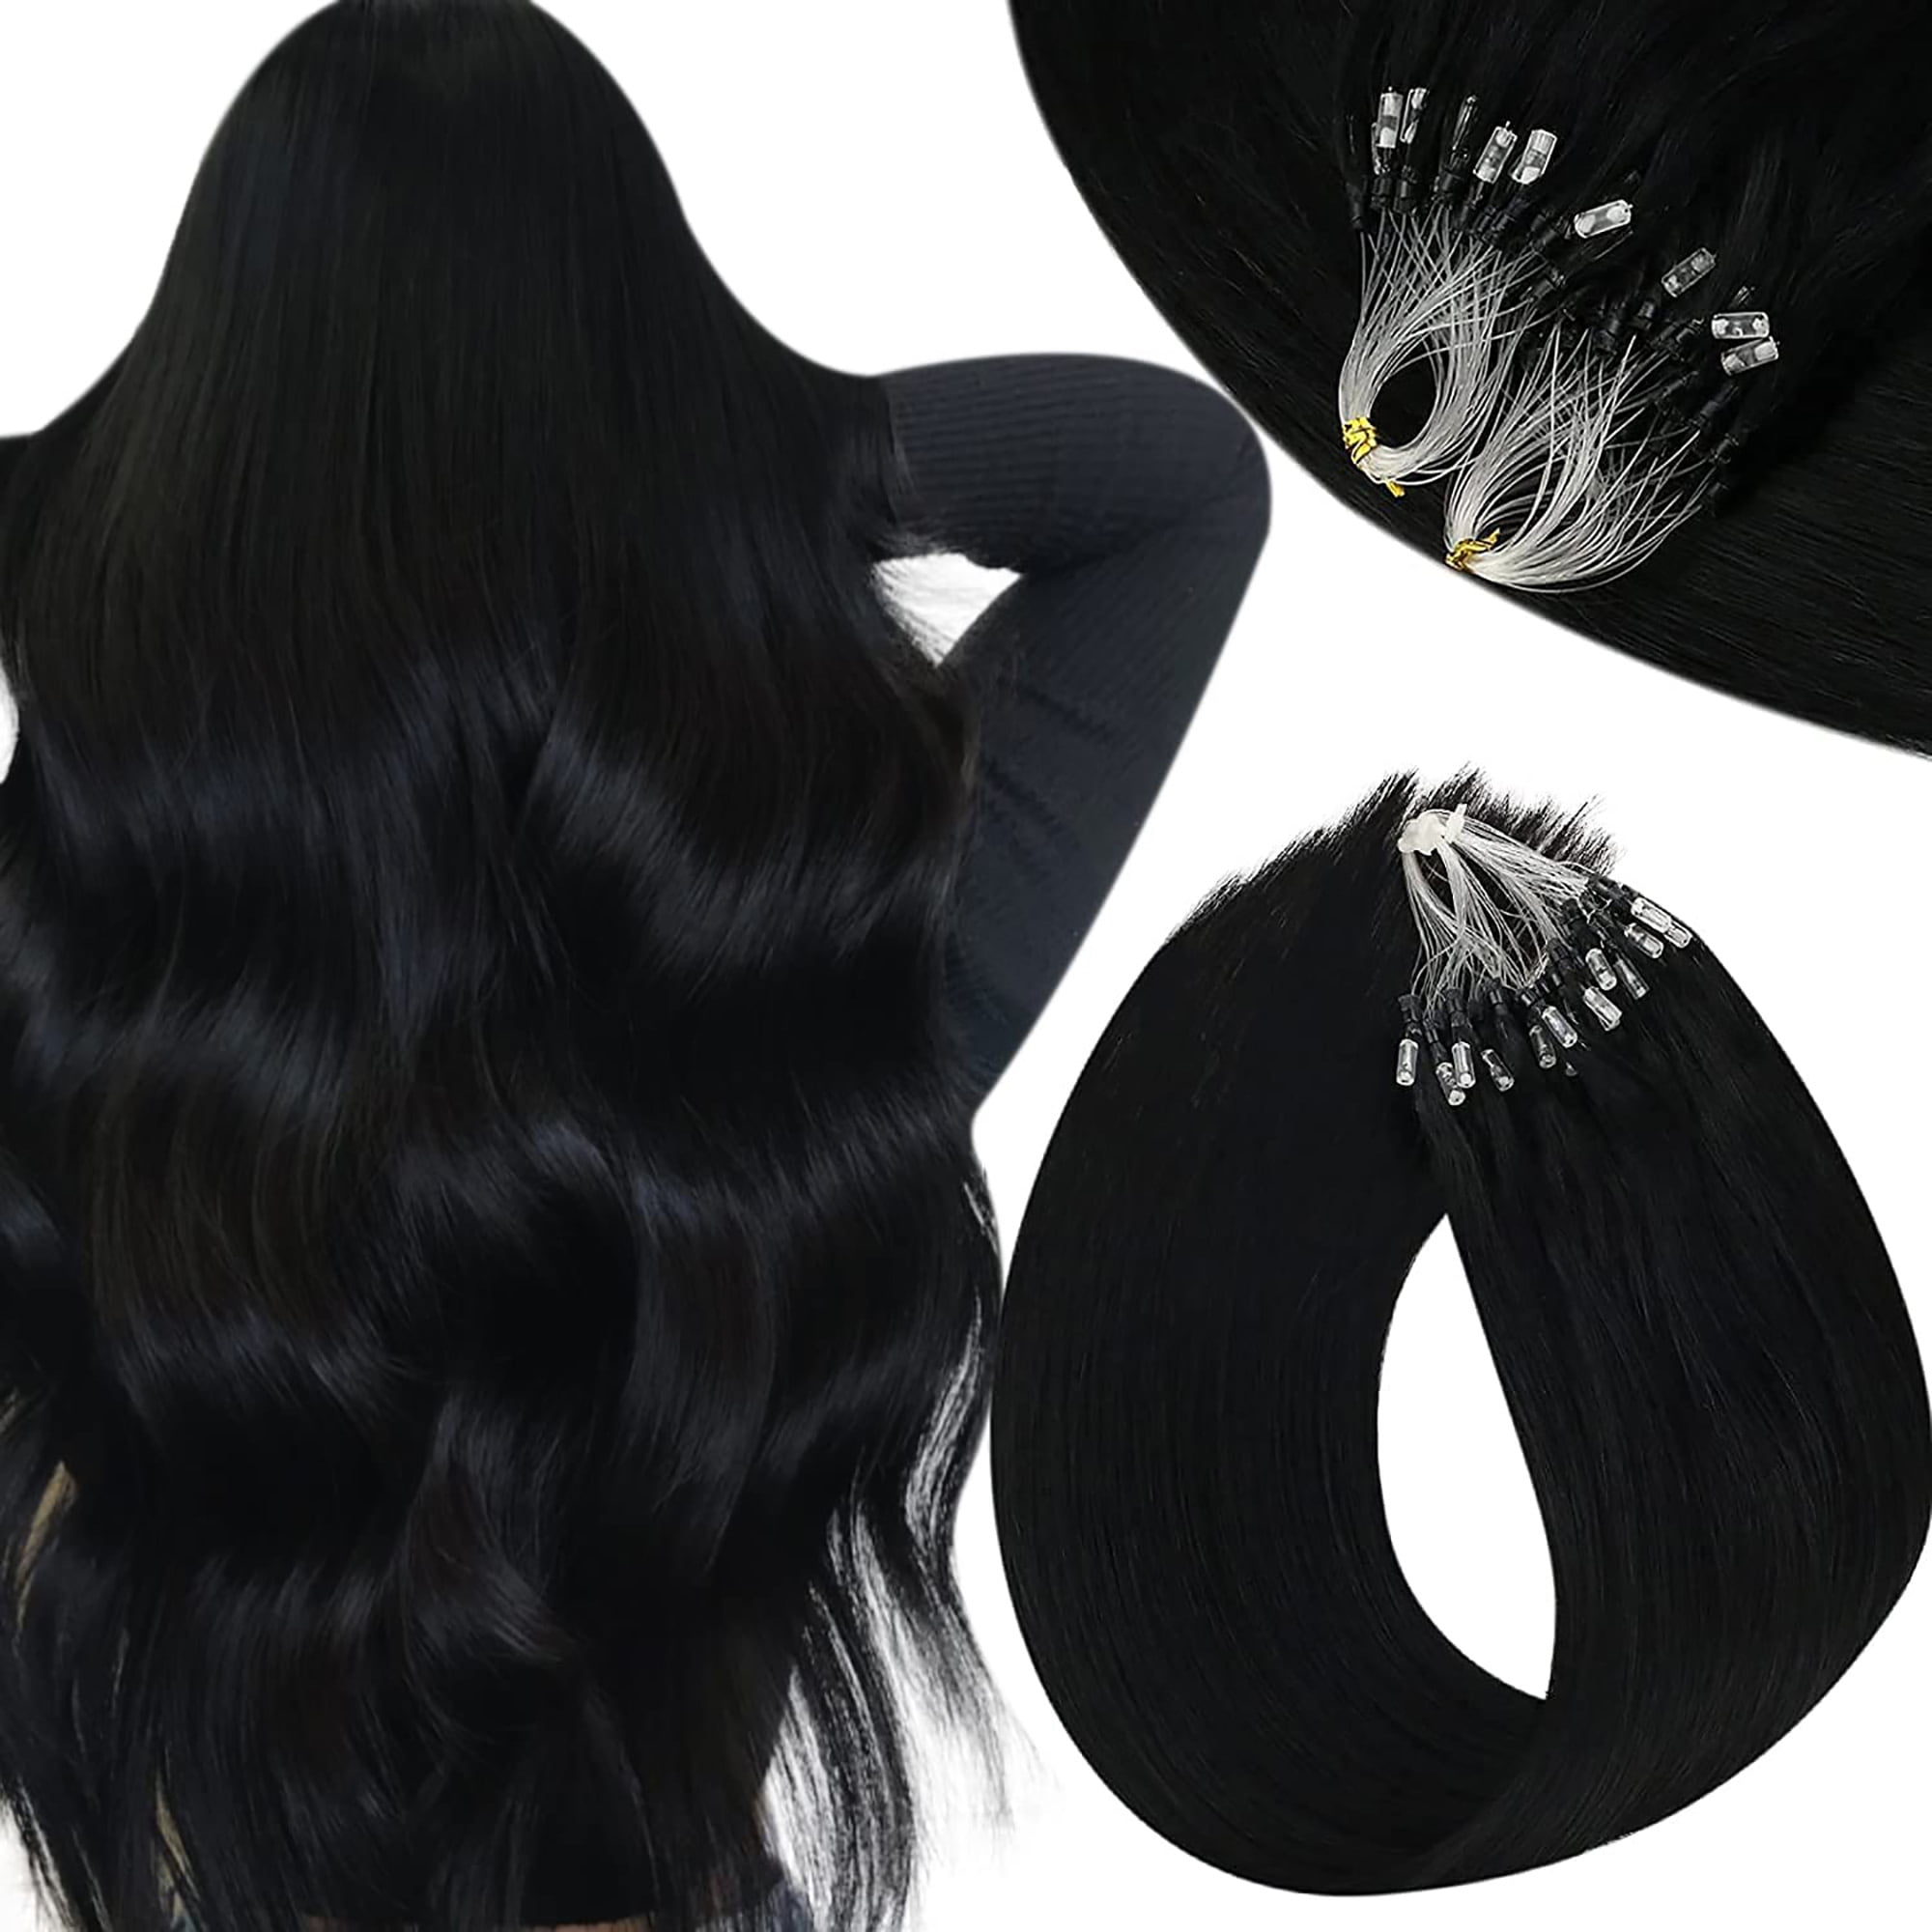 The Micro Ring Hair Extensions Guide